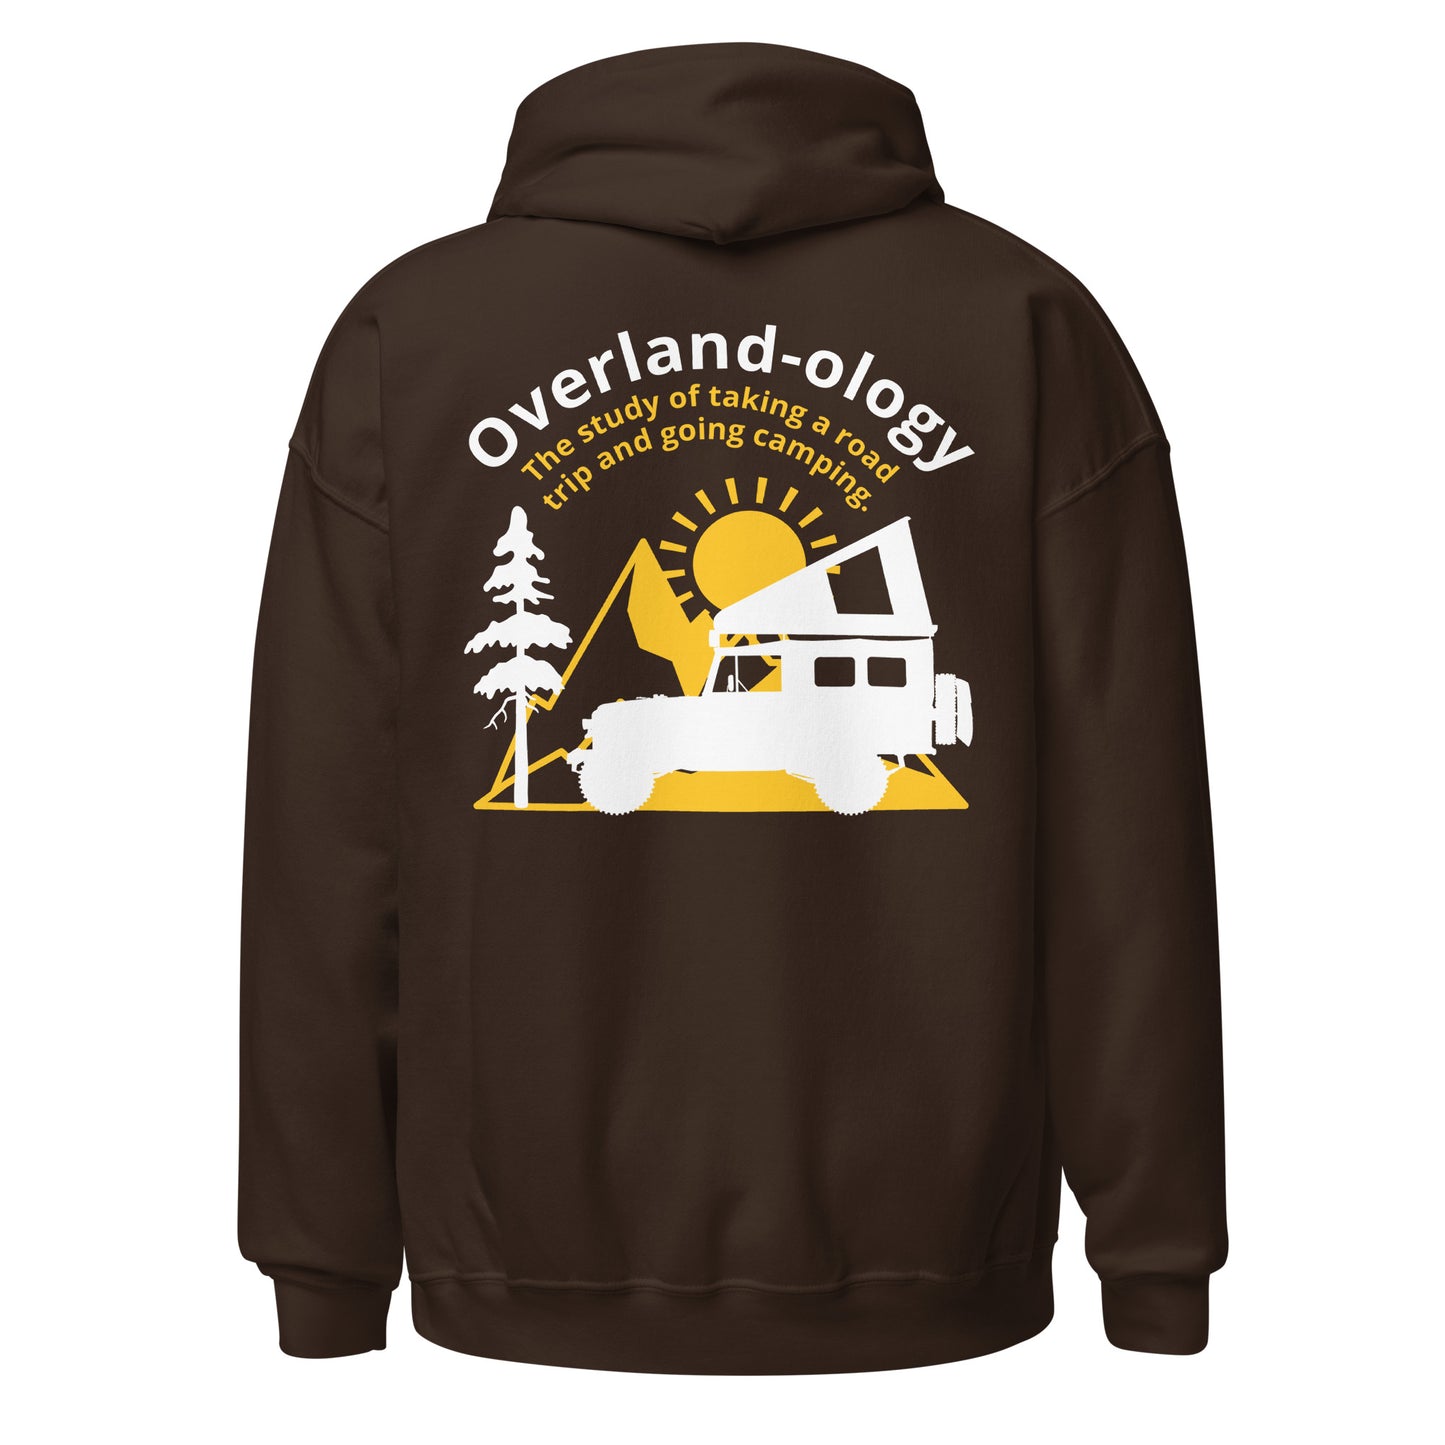 Overland-ology Hoodie. The study of road-trips and camping. Dark Chocolate. Back View. overland365.com